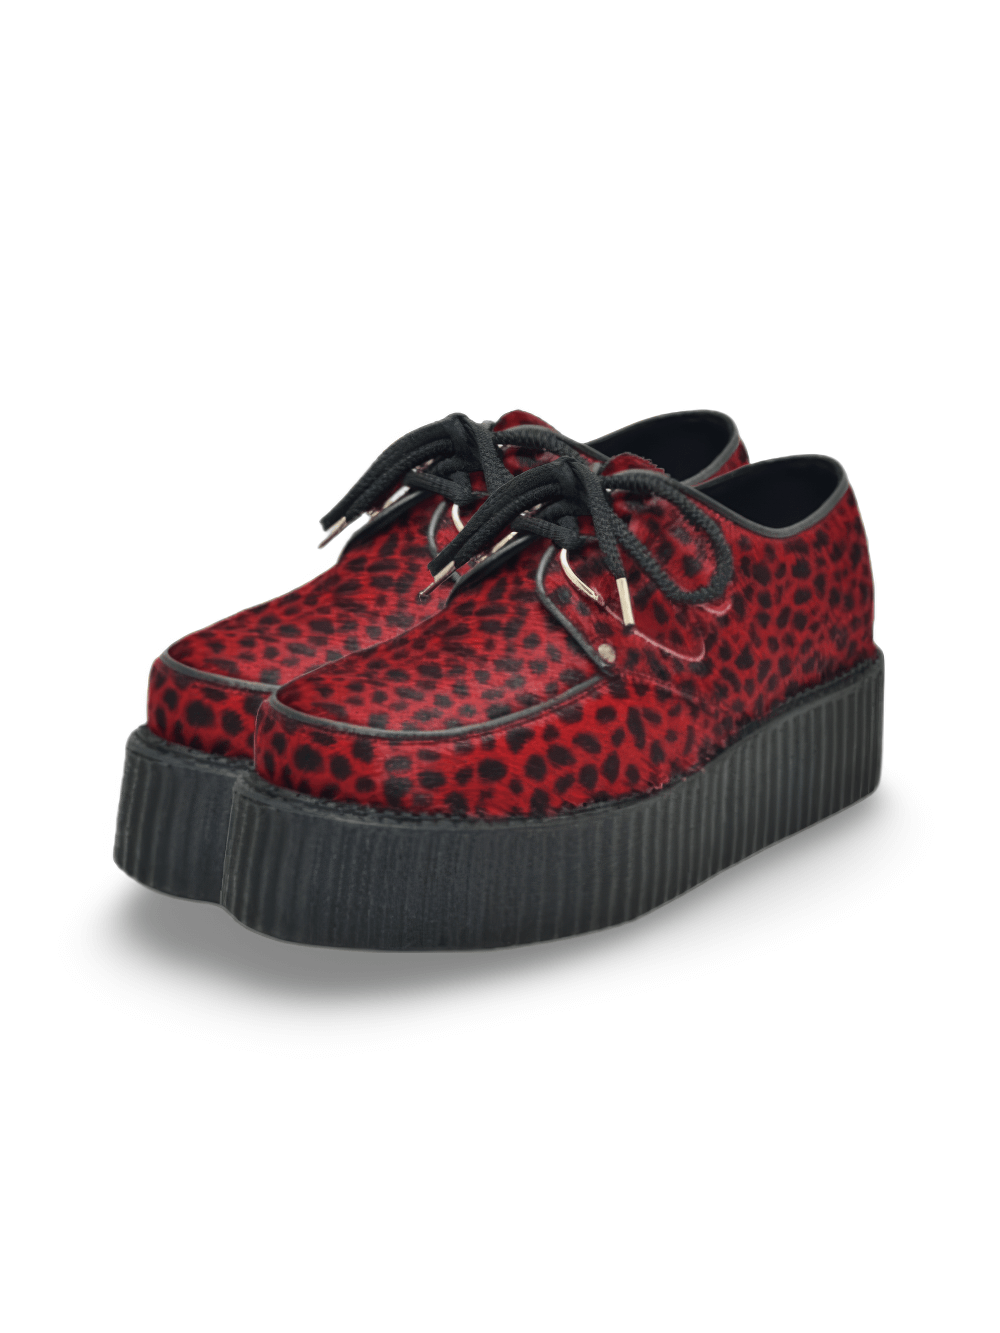 Bold Unisex Red and White Leopard Fur Platform Creepers